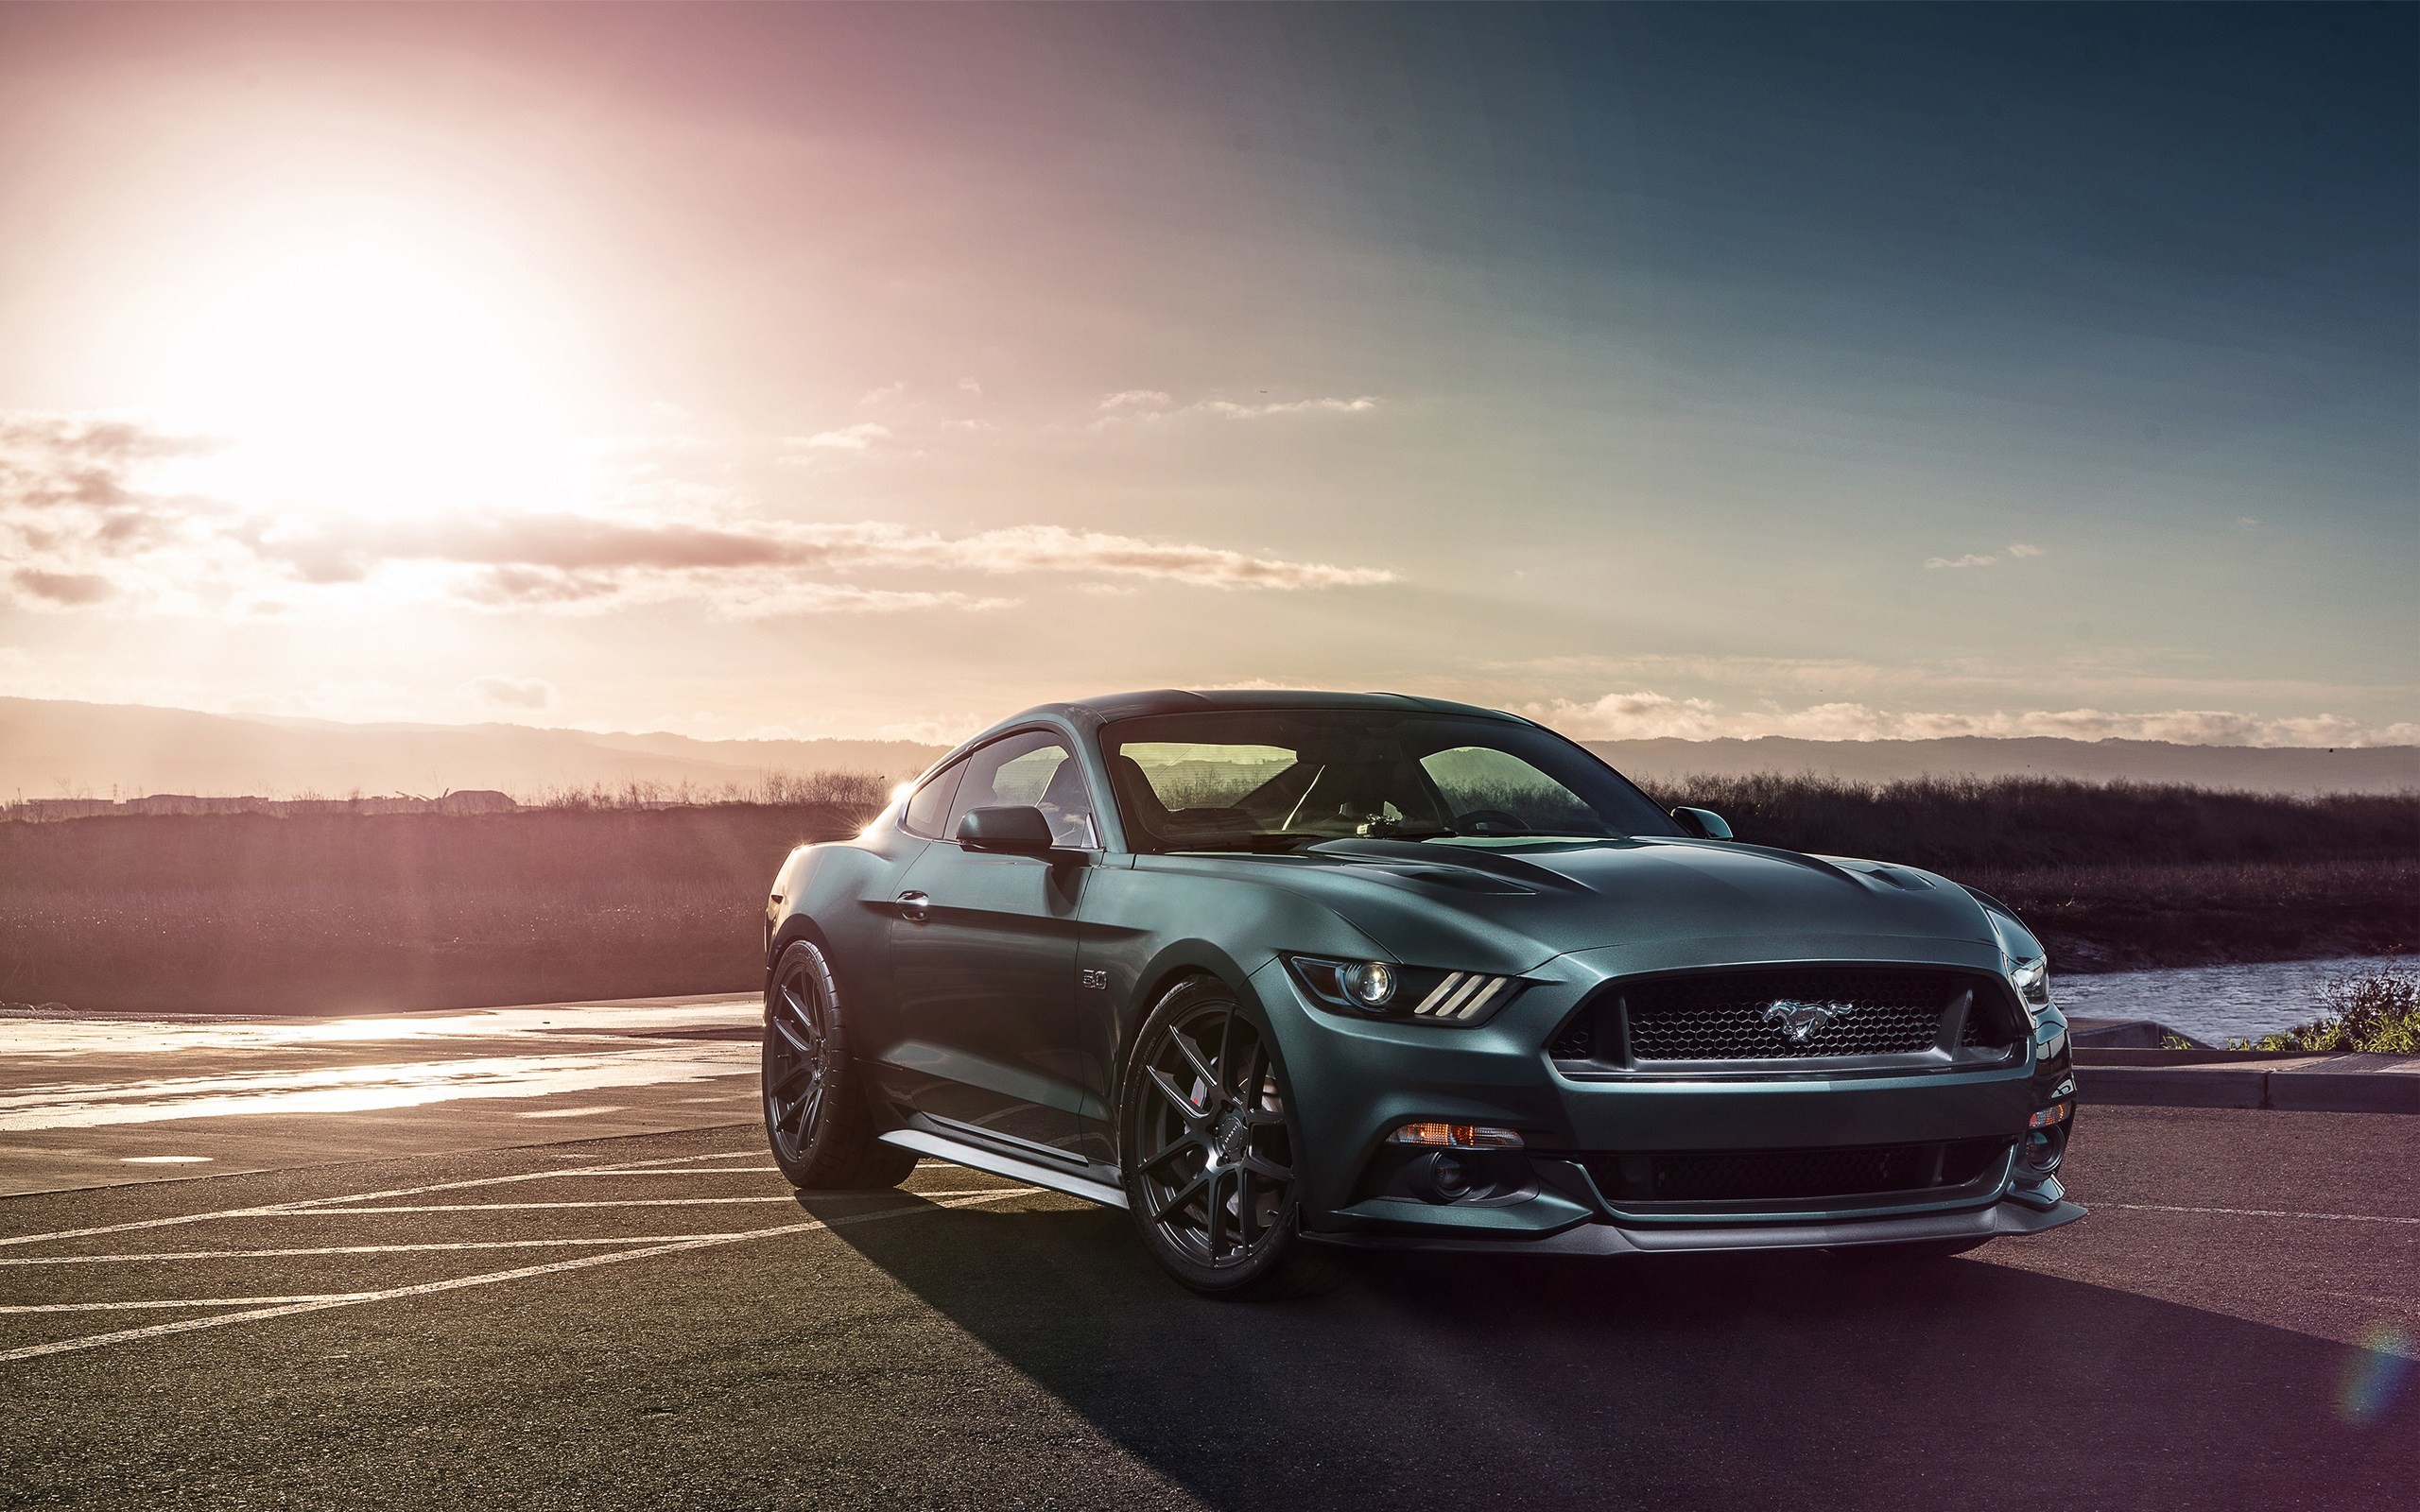 2018 Ford Mustang Shelby Wallpaper ·① WallpaperTag